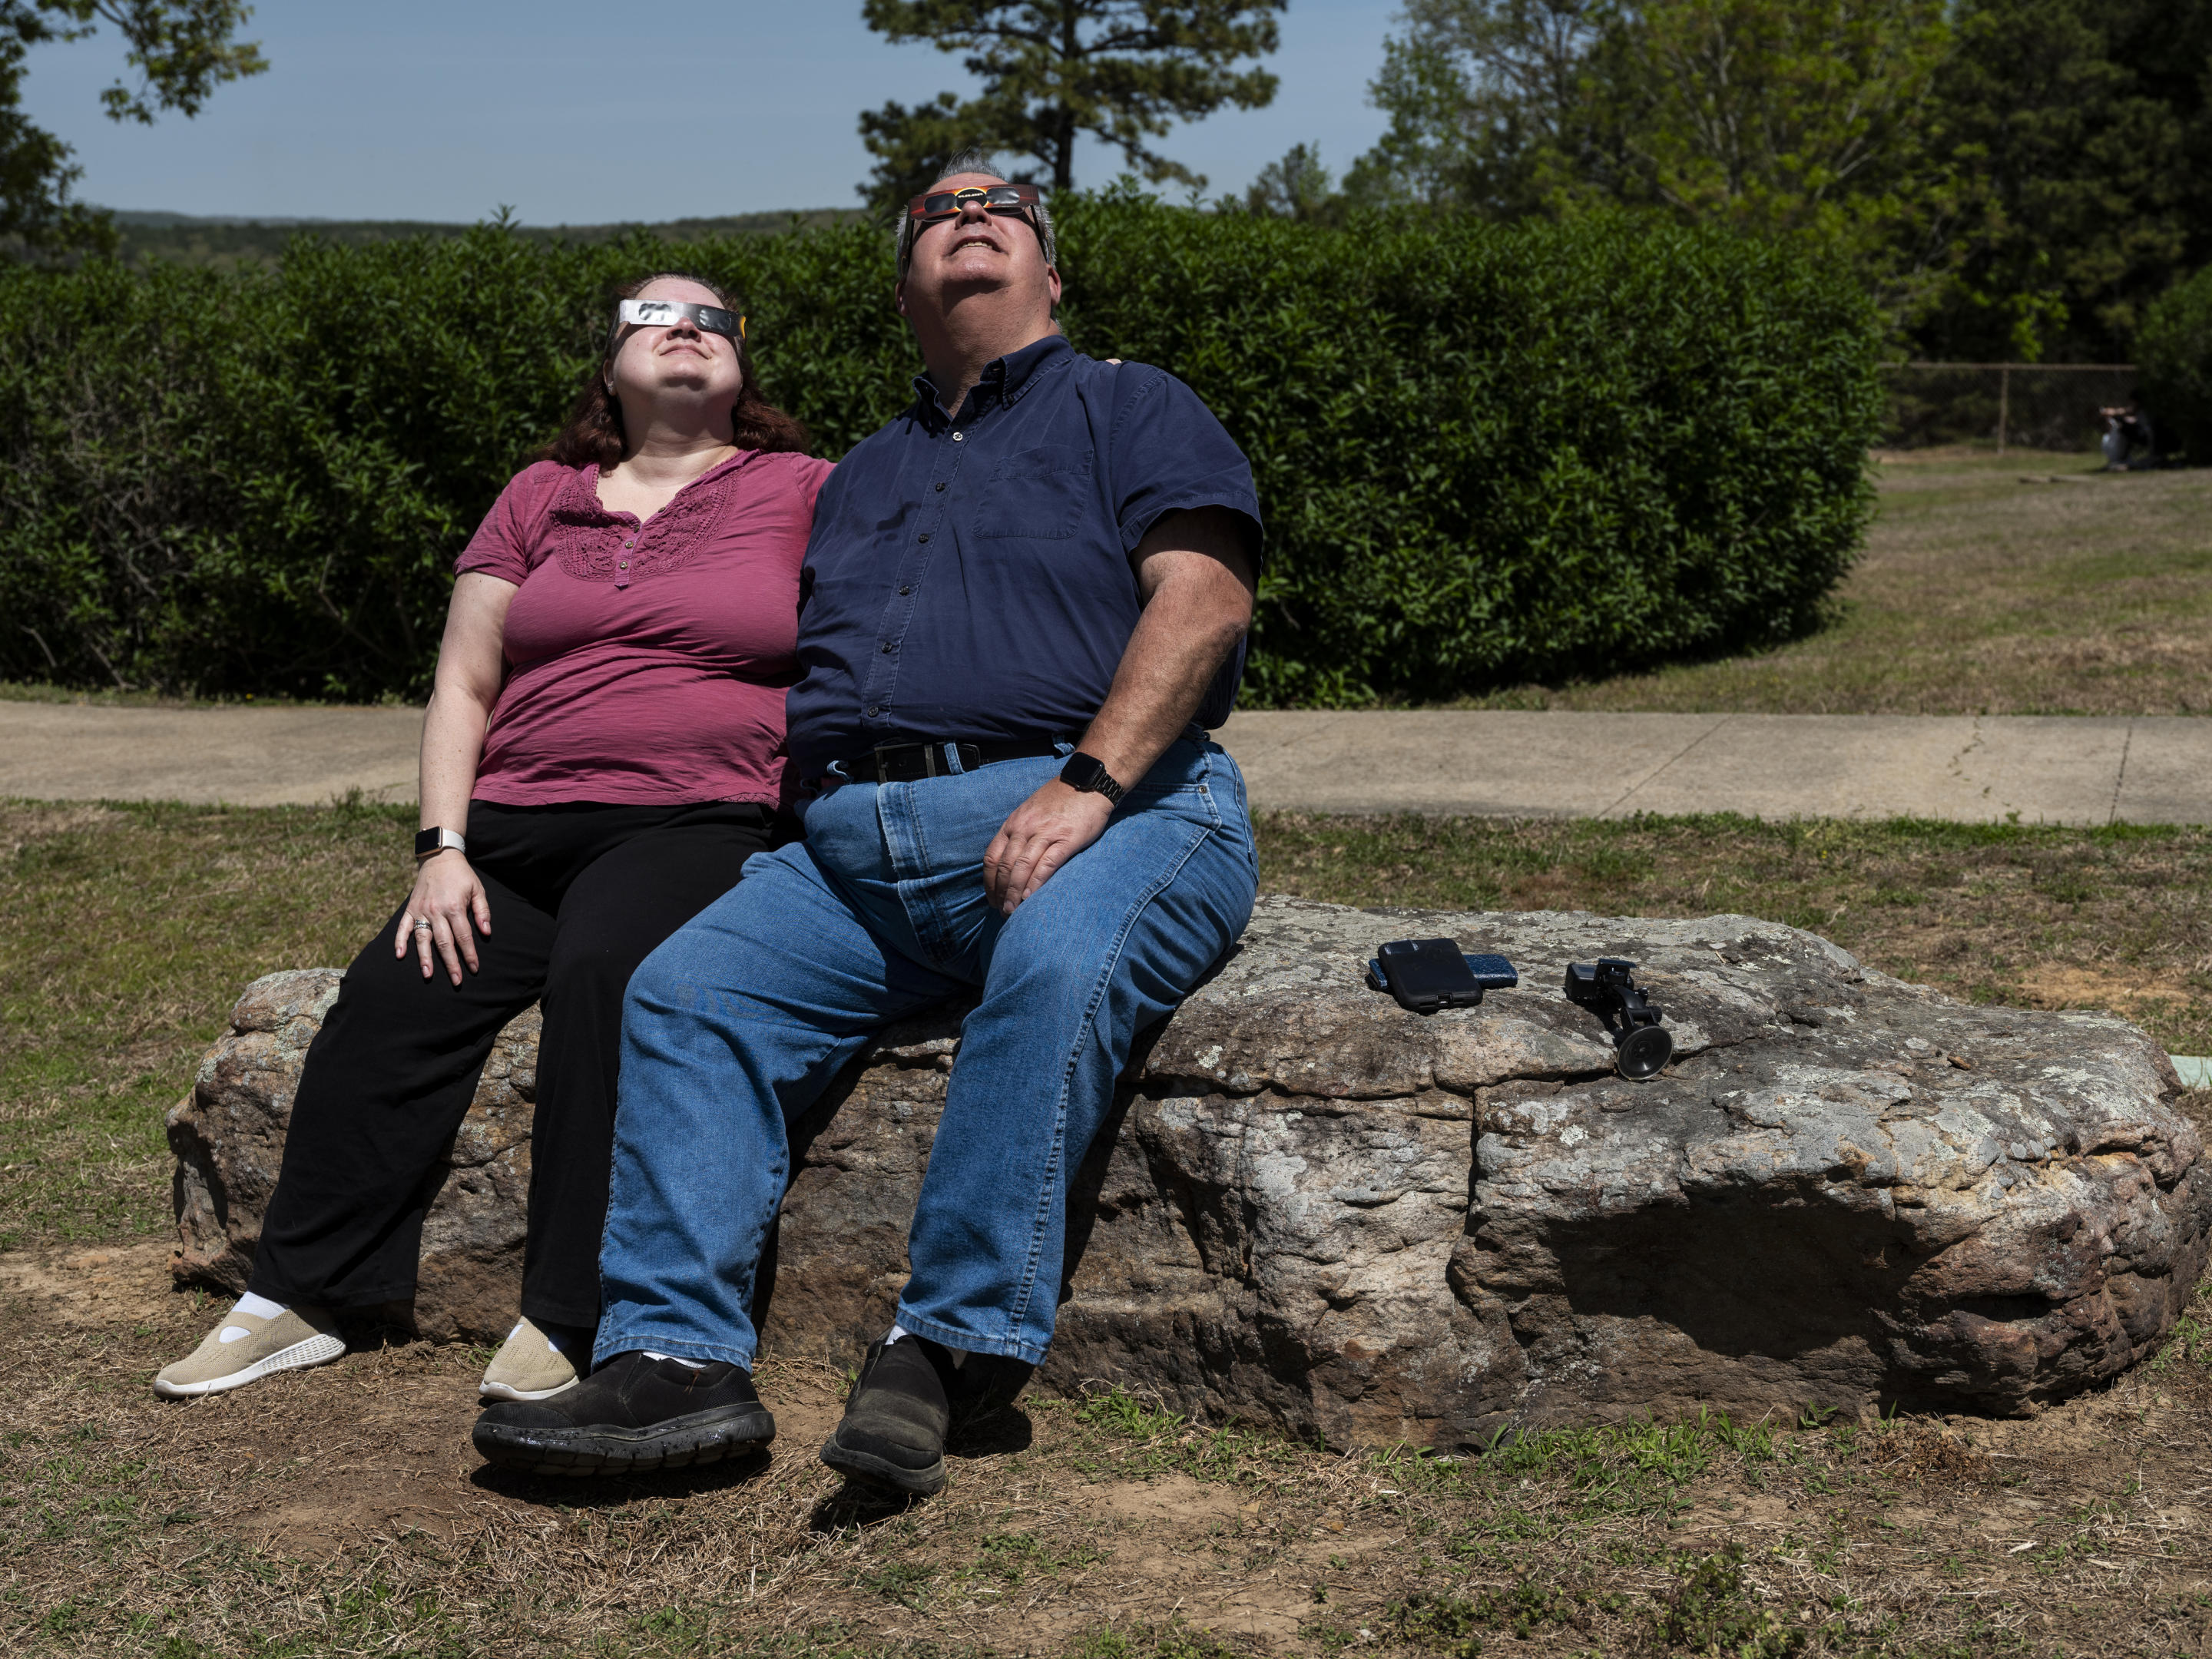 Wendy and Richard Erhard watch the solar eclipse from the John F. Kennedy Memorial Overlook in Cleburne County, Ark